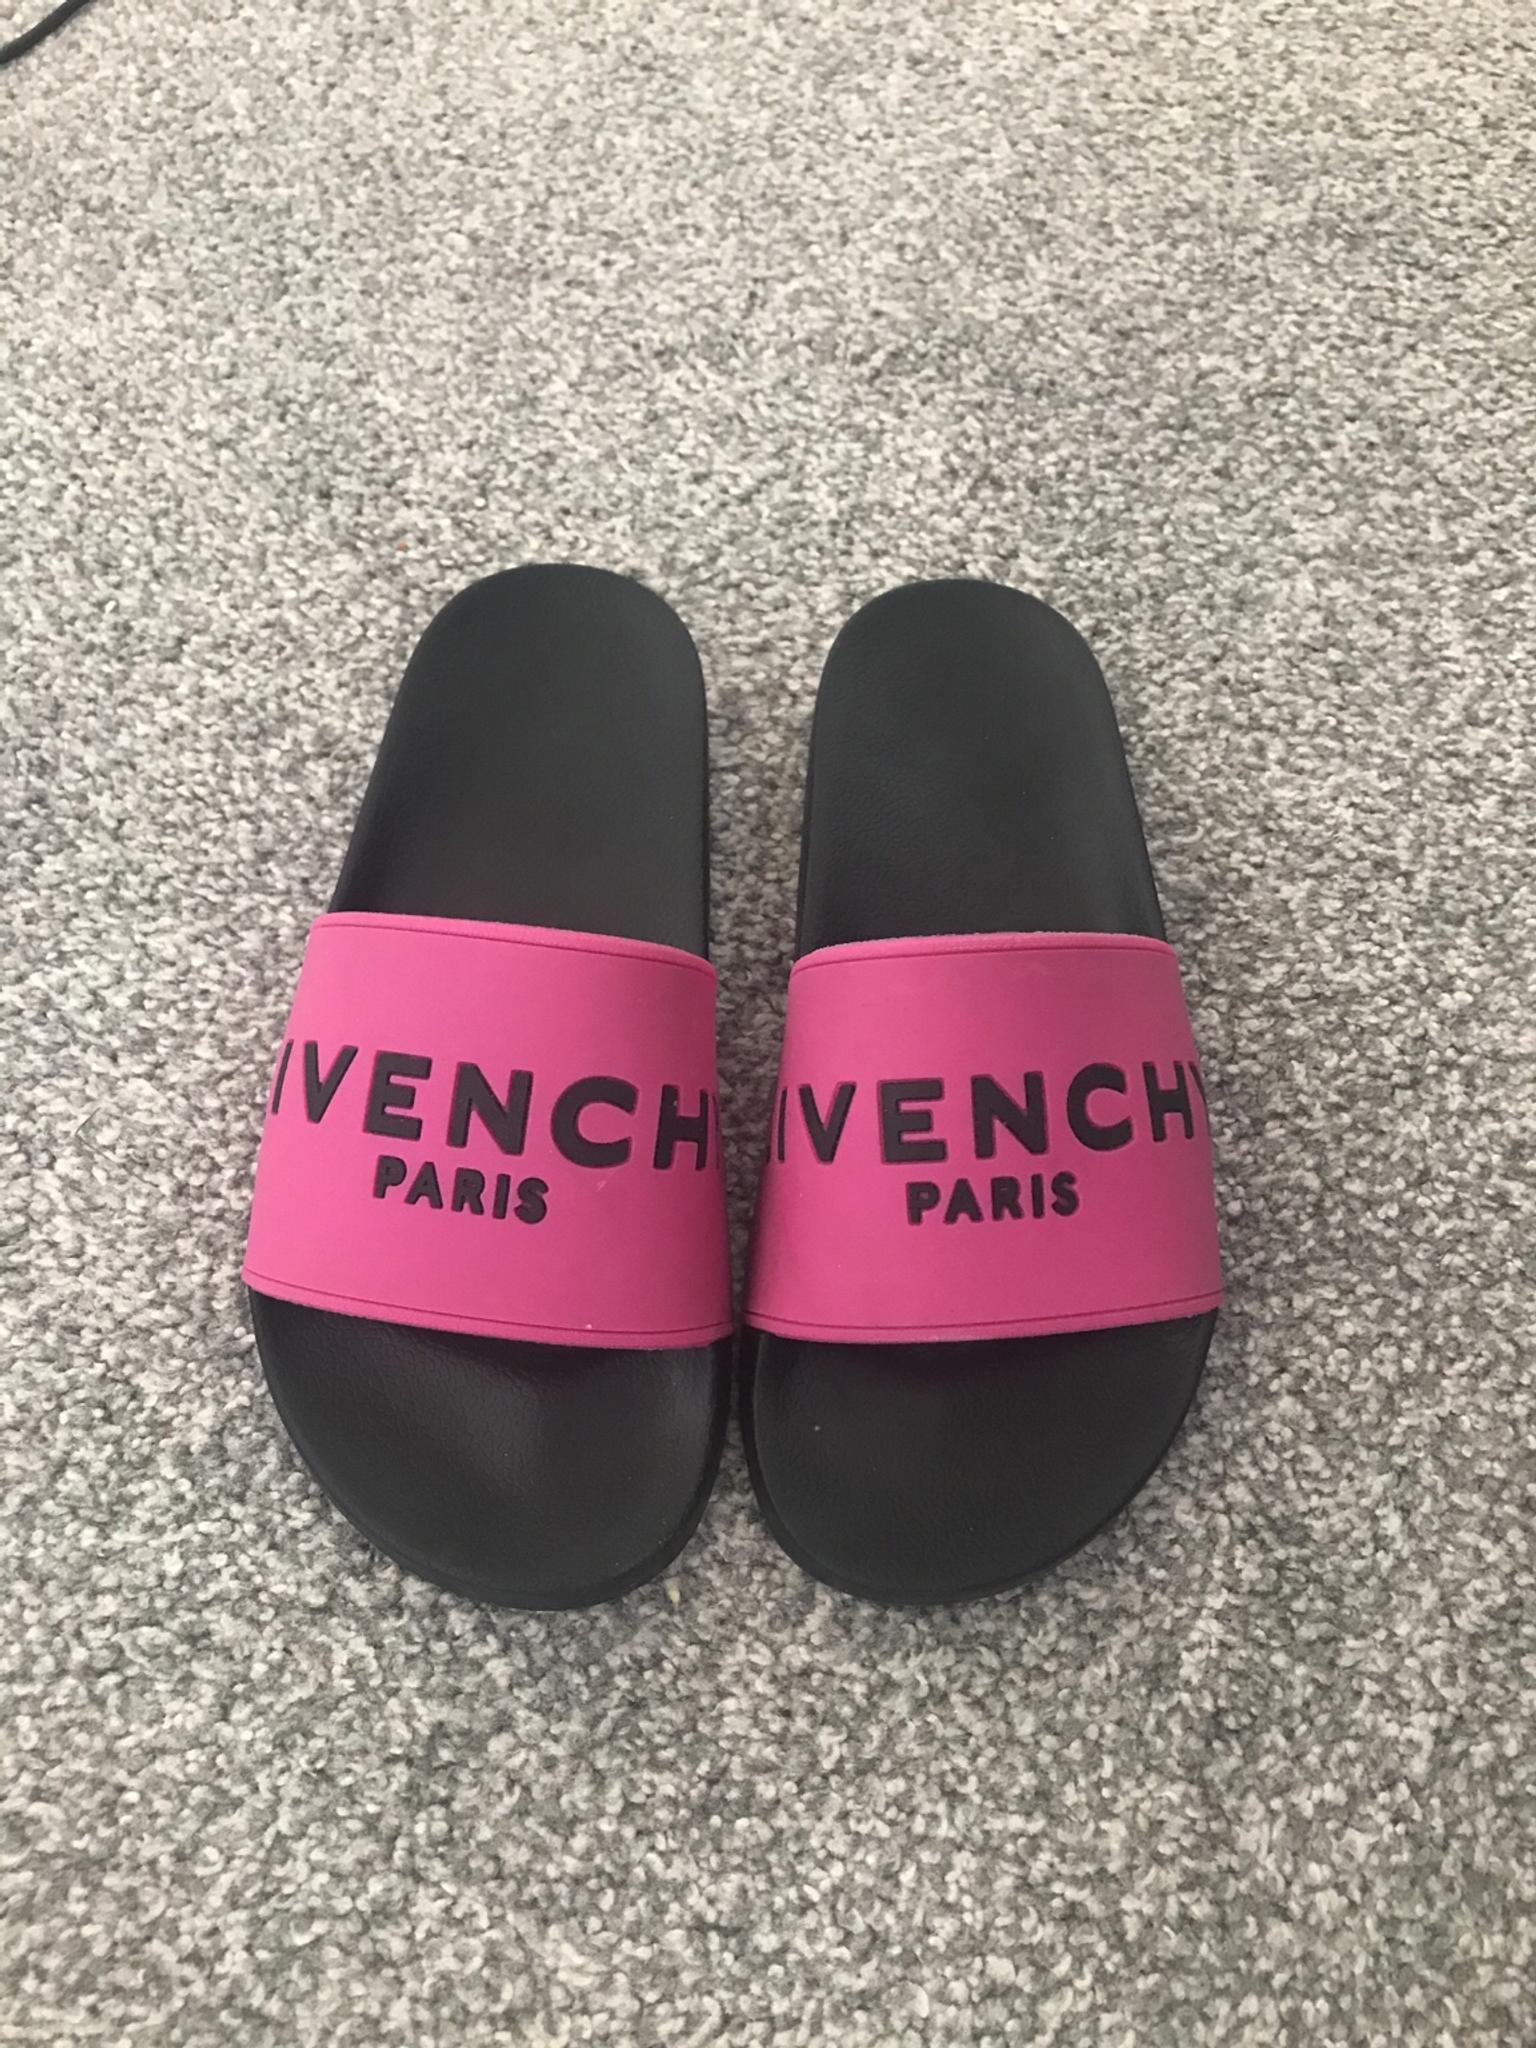 Givenchy sliders size uk 4 in Orford 